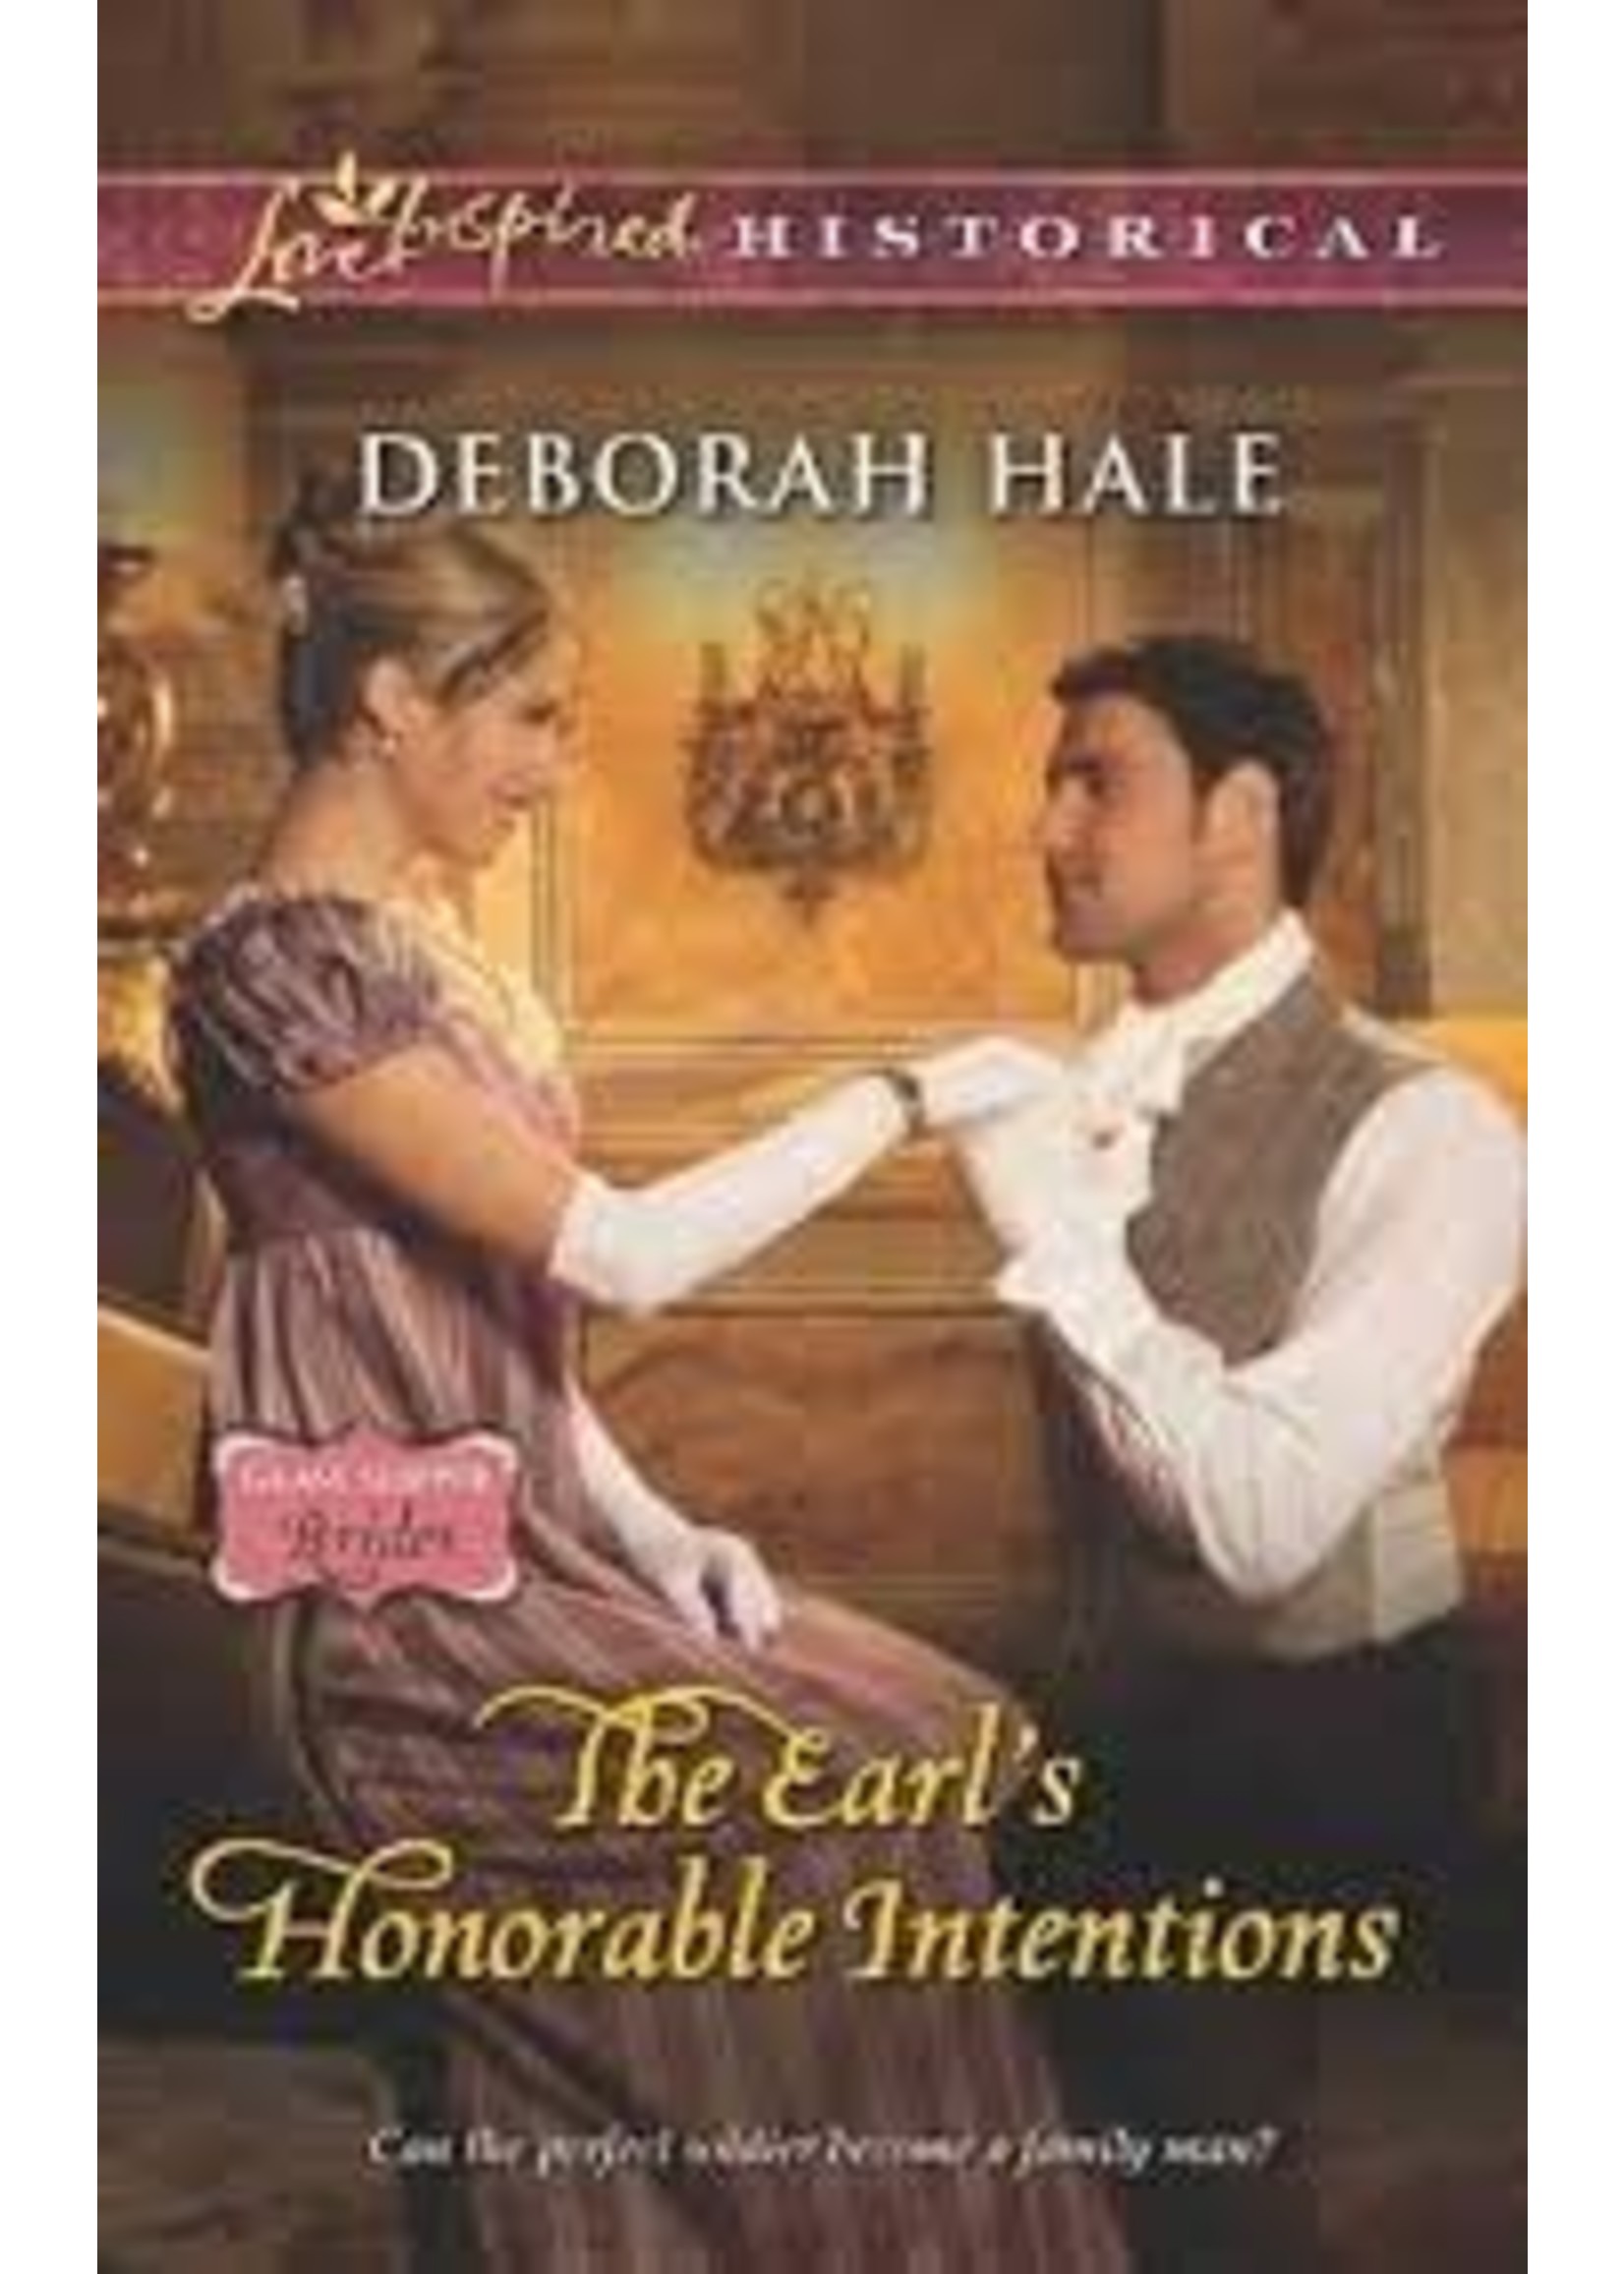 The Earl's Honorable Intentions by Deborah Hale